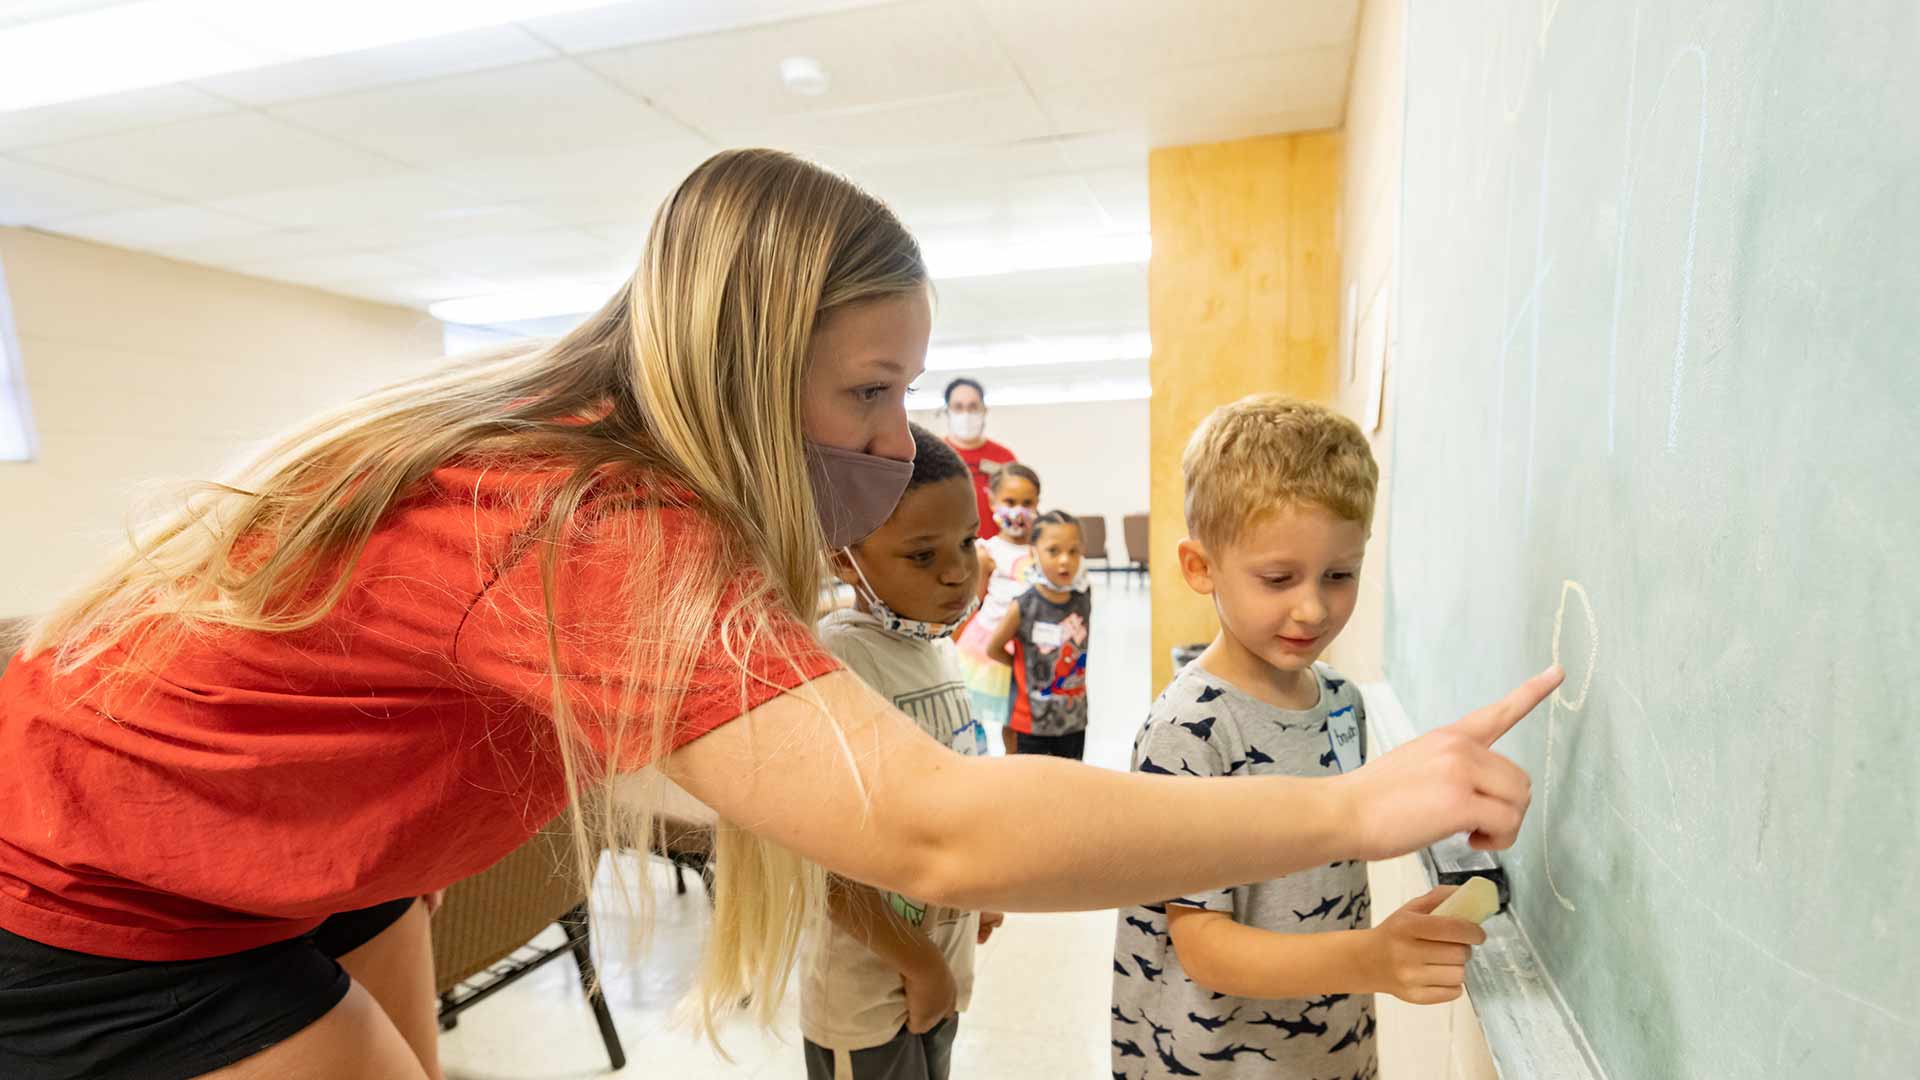 A teacher helping an elementary student write on a chalkboard in a classroom.